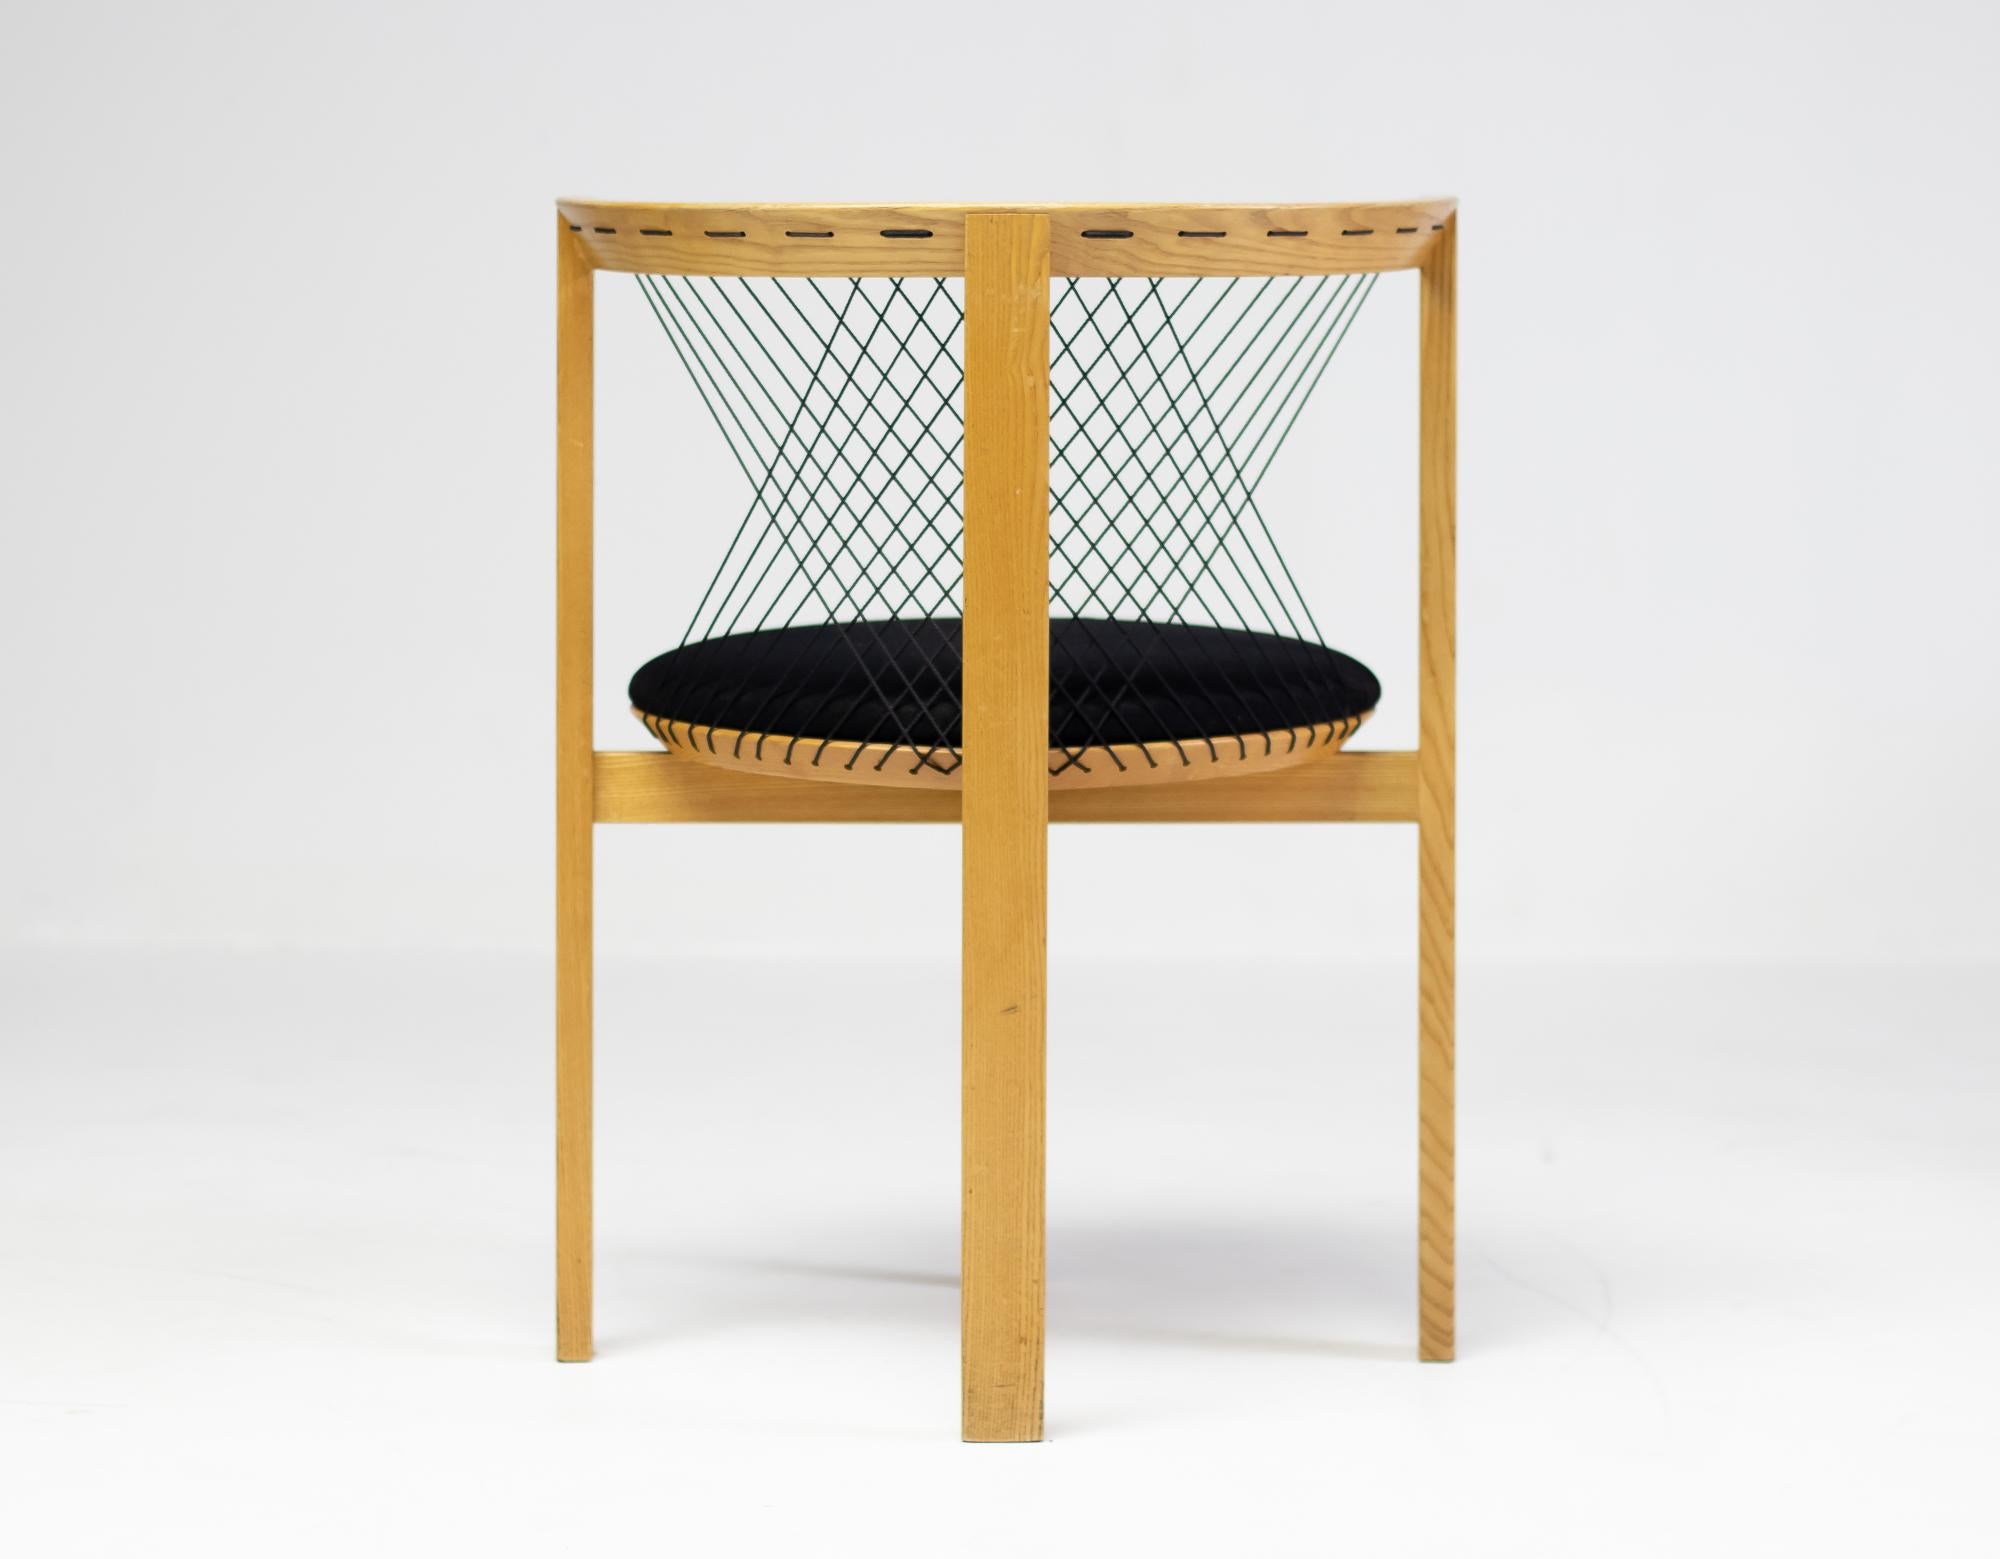 String armchair designed by Niels Jørgen Haugesen for Tranekaer in Denmark.
Very smart and comfortable design. Because the 4 legs are configured with one leg in front, the person sitting on the chair can move his/her legs around freely. The